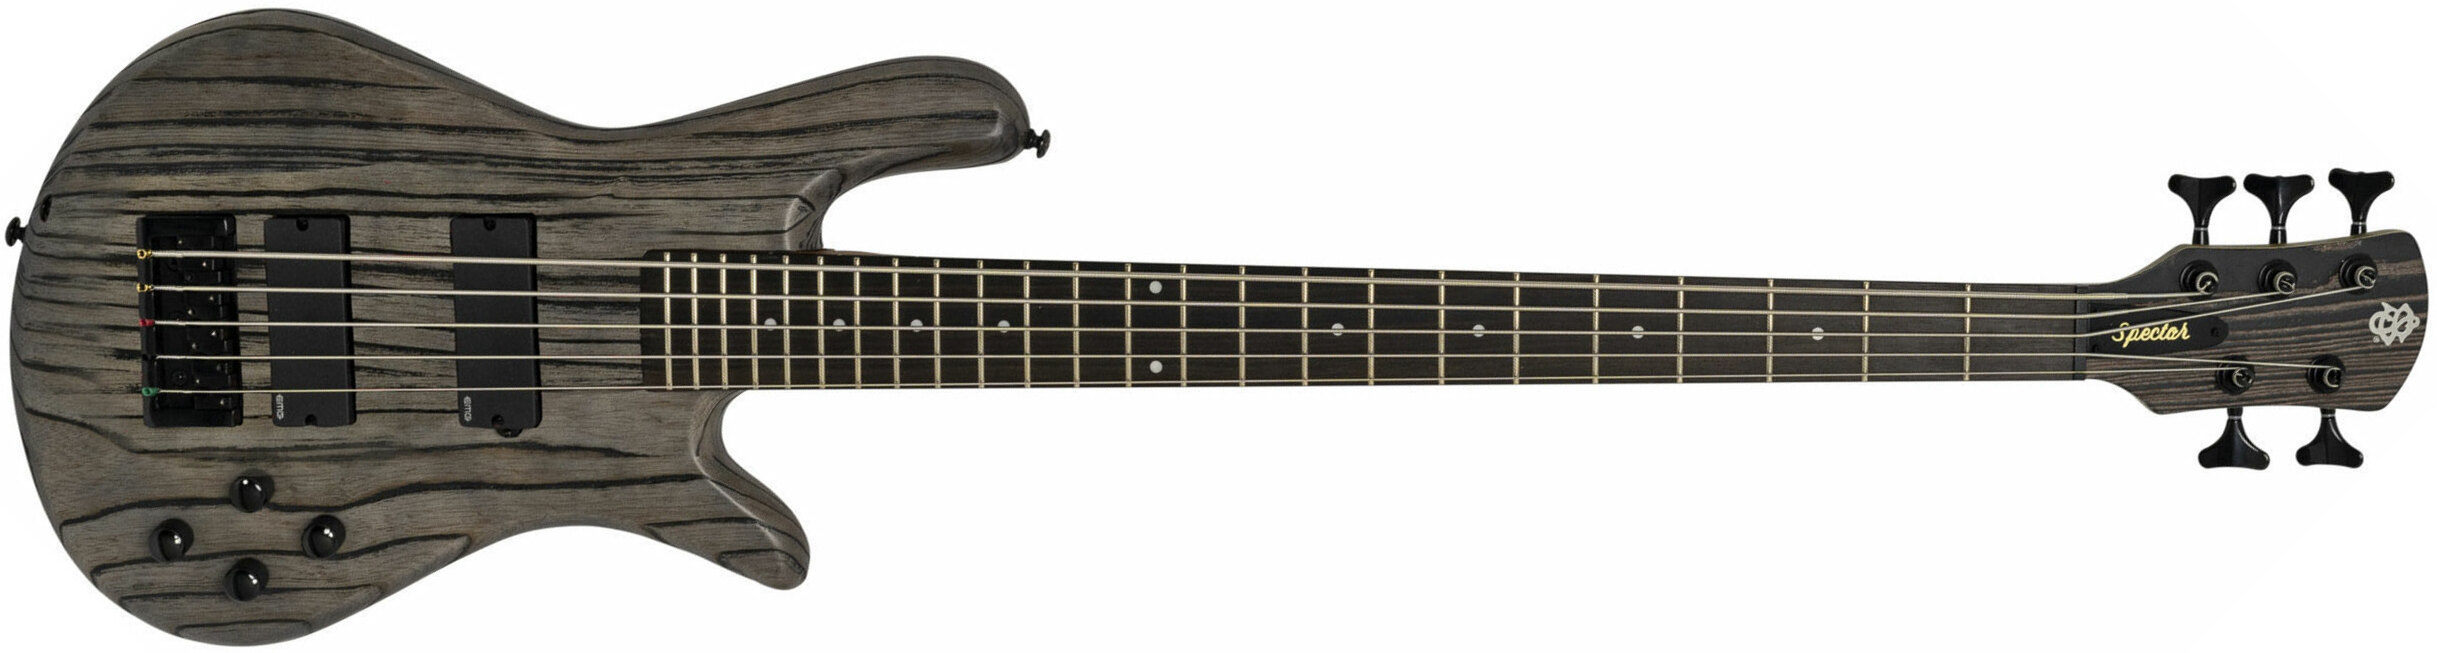 Spector Ns Pulse I 5c Active Emg Eb - Charcoal Grey - Solid body elektrische bas - Main picture